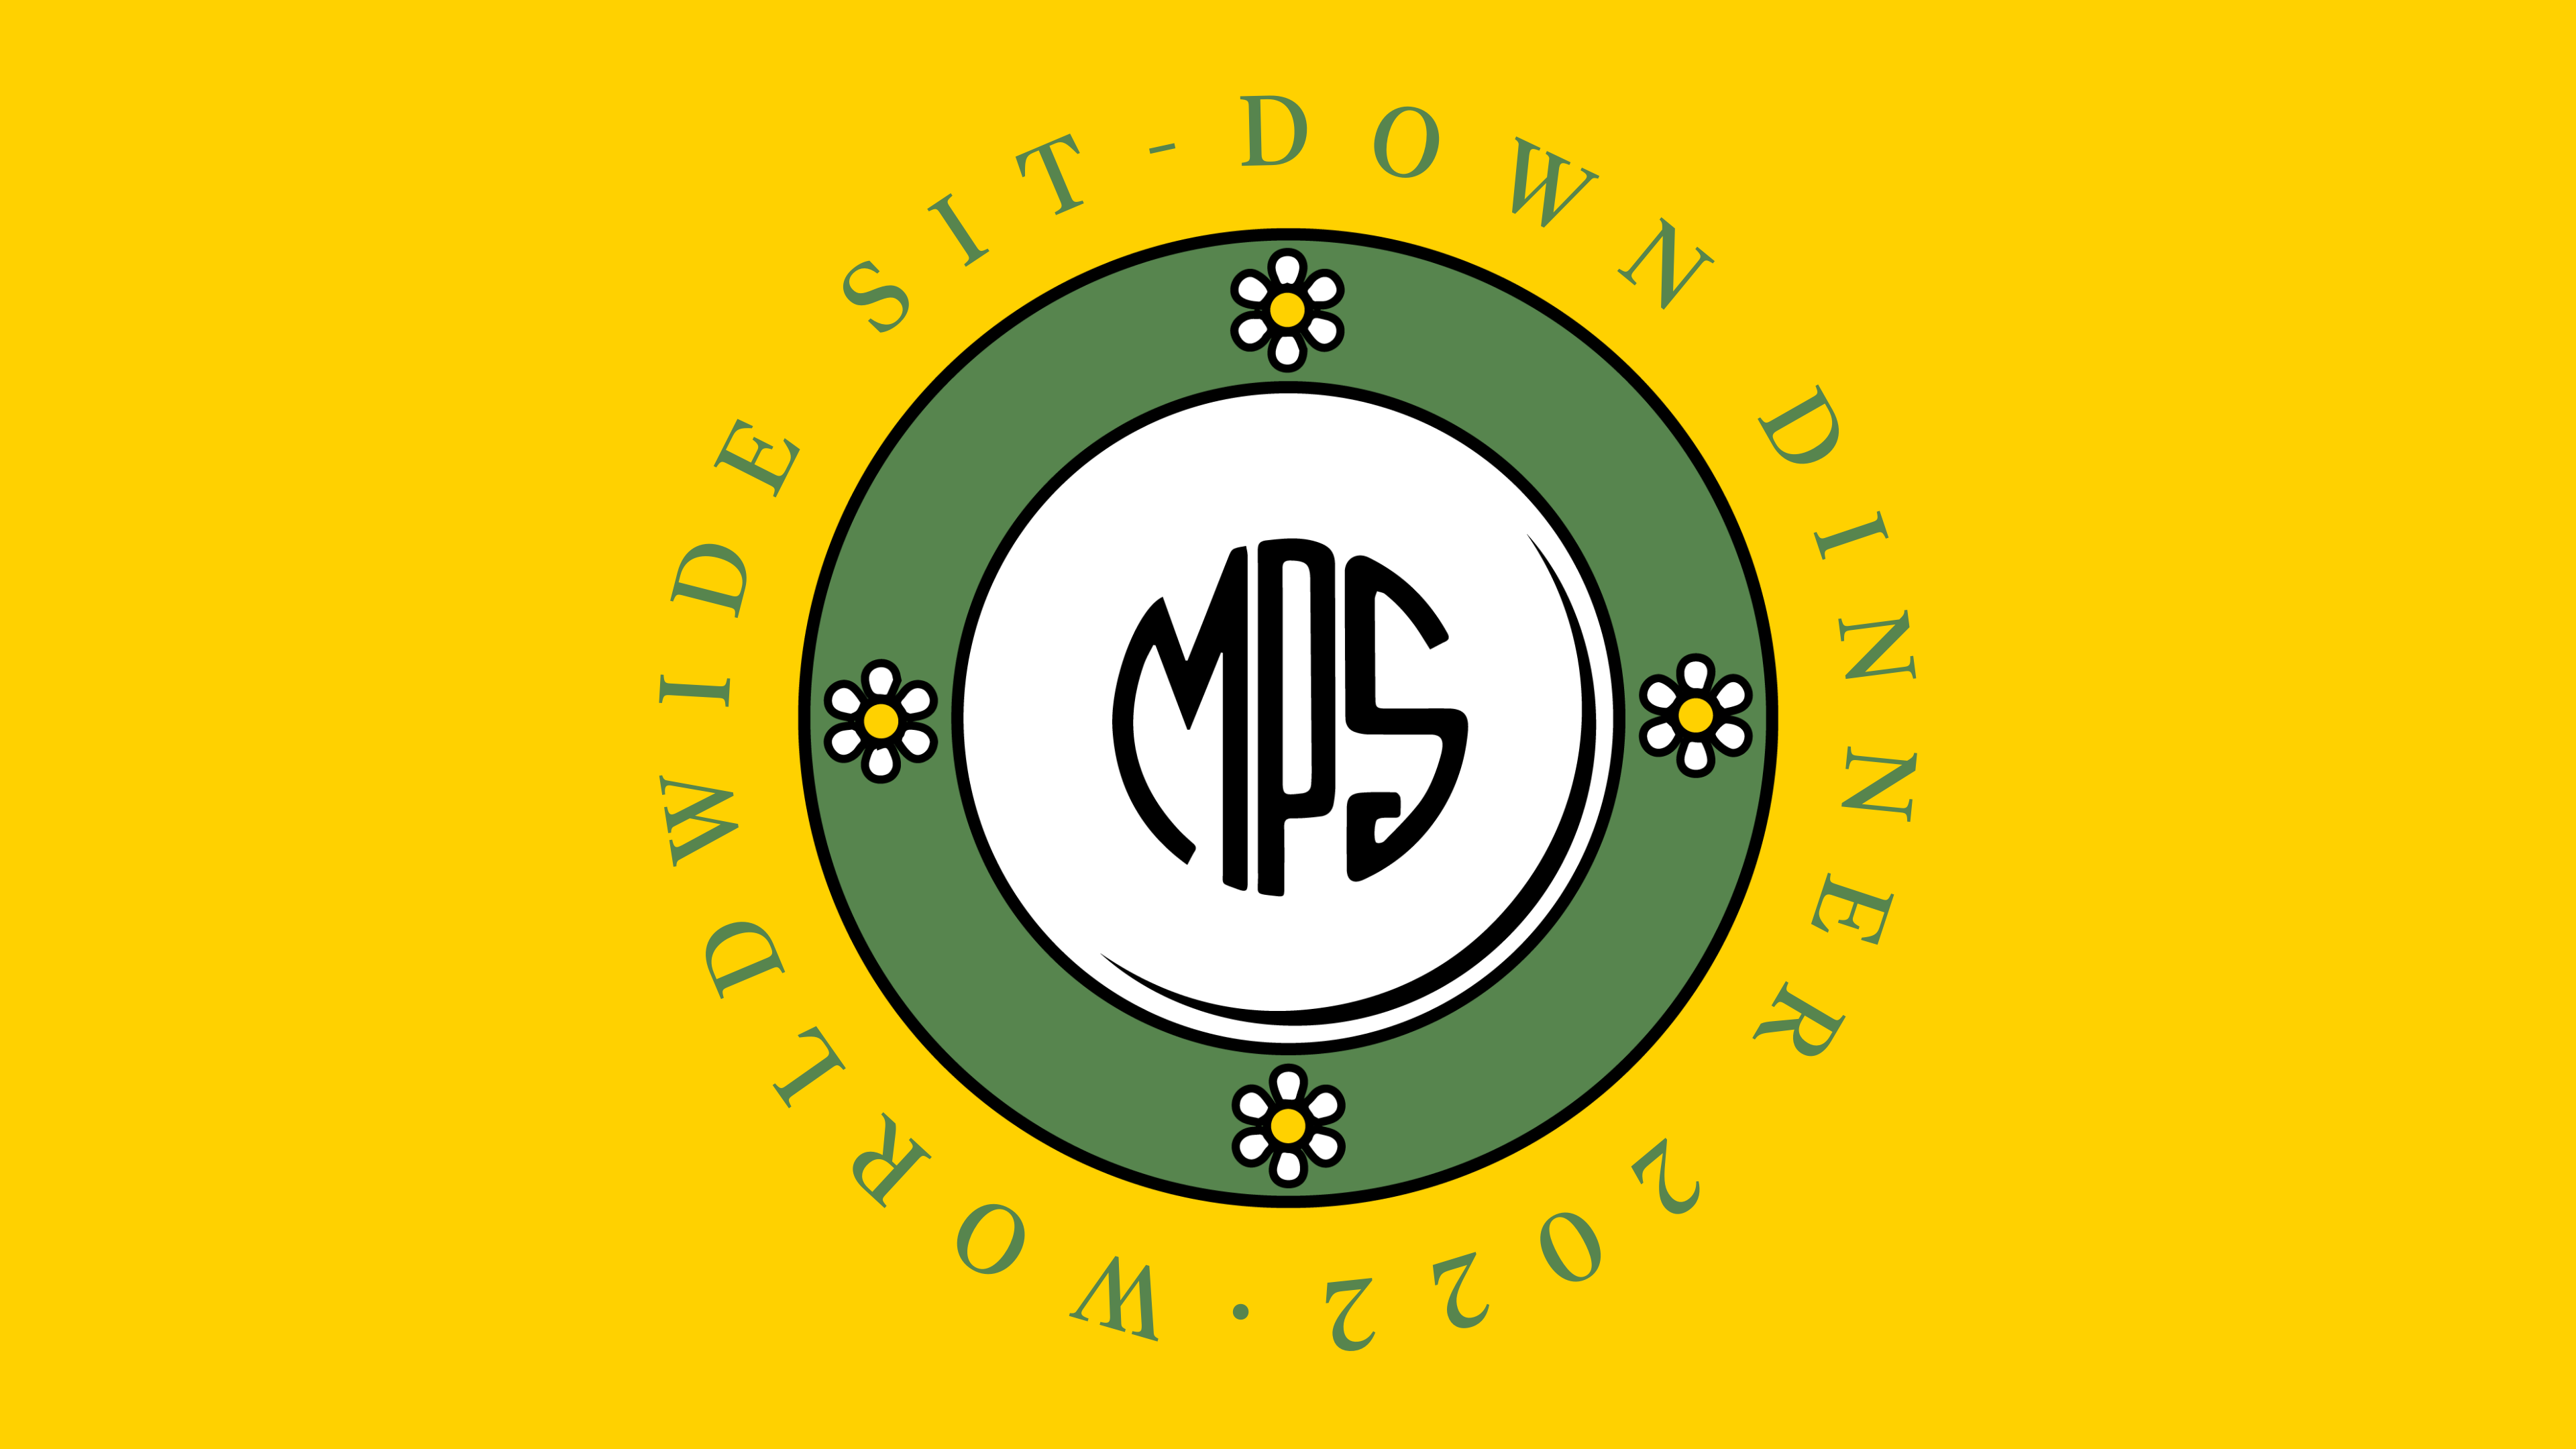 Worldwide Sit-Down Dinner daisy plate logo with yellow background